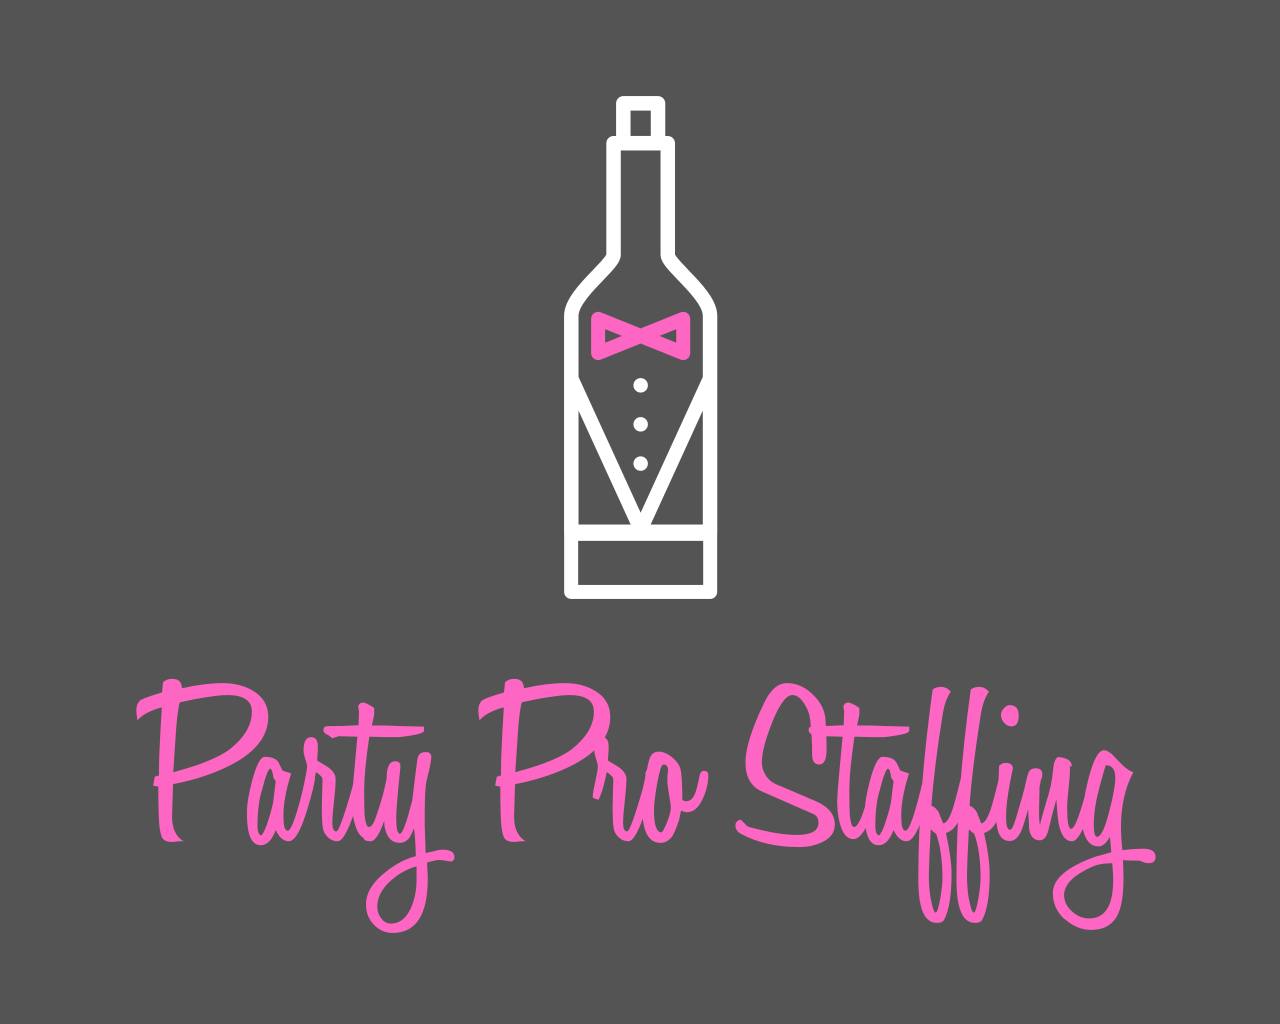 Party Pro Staffing